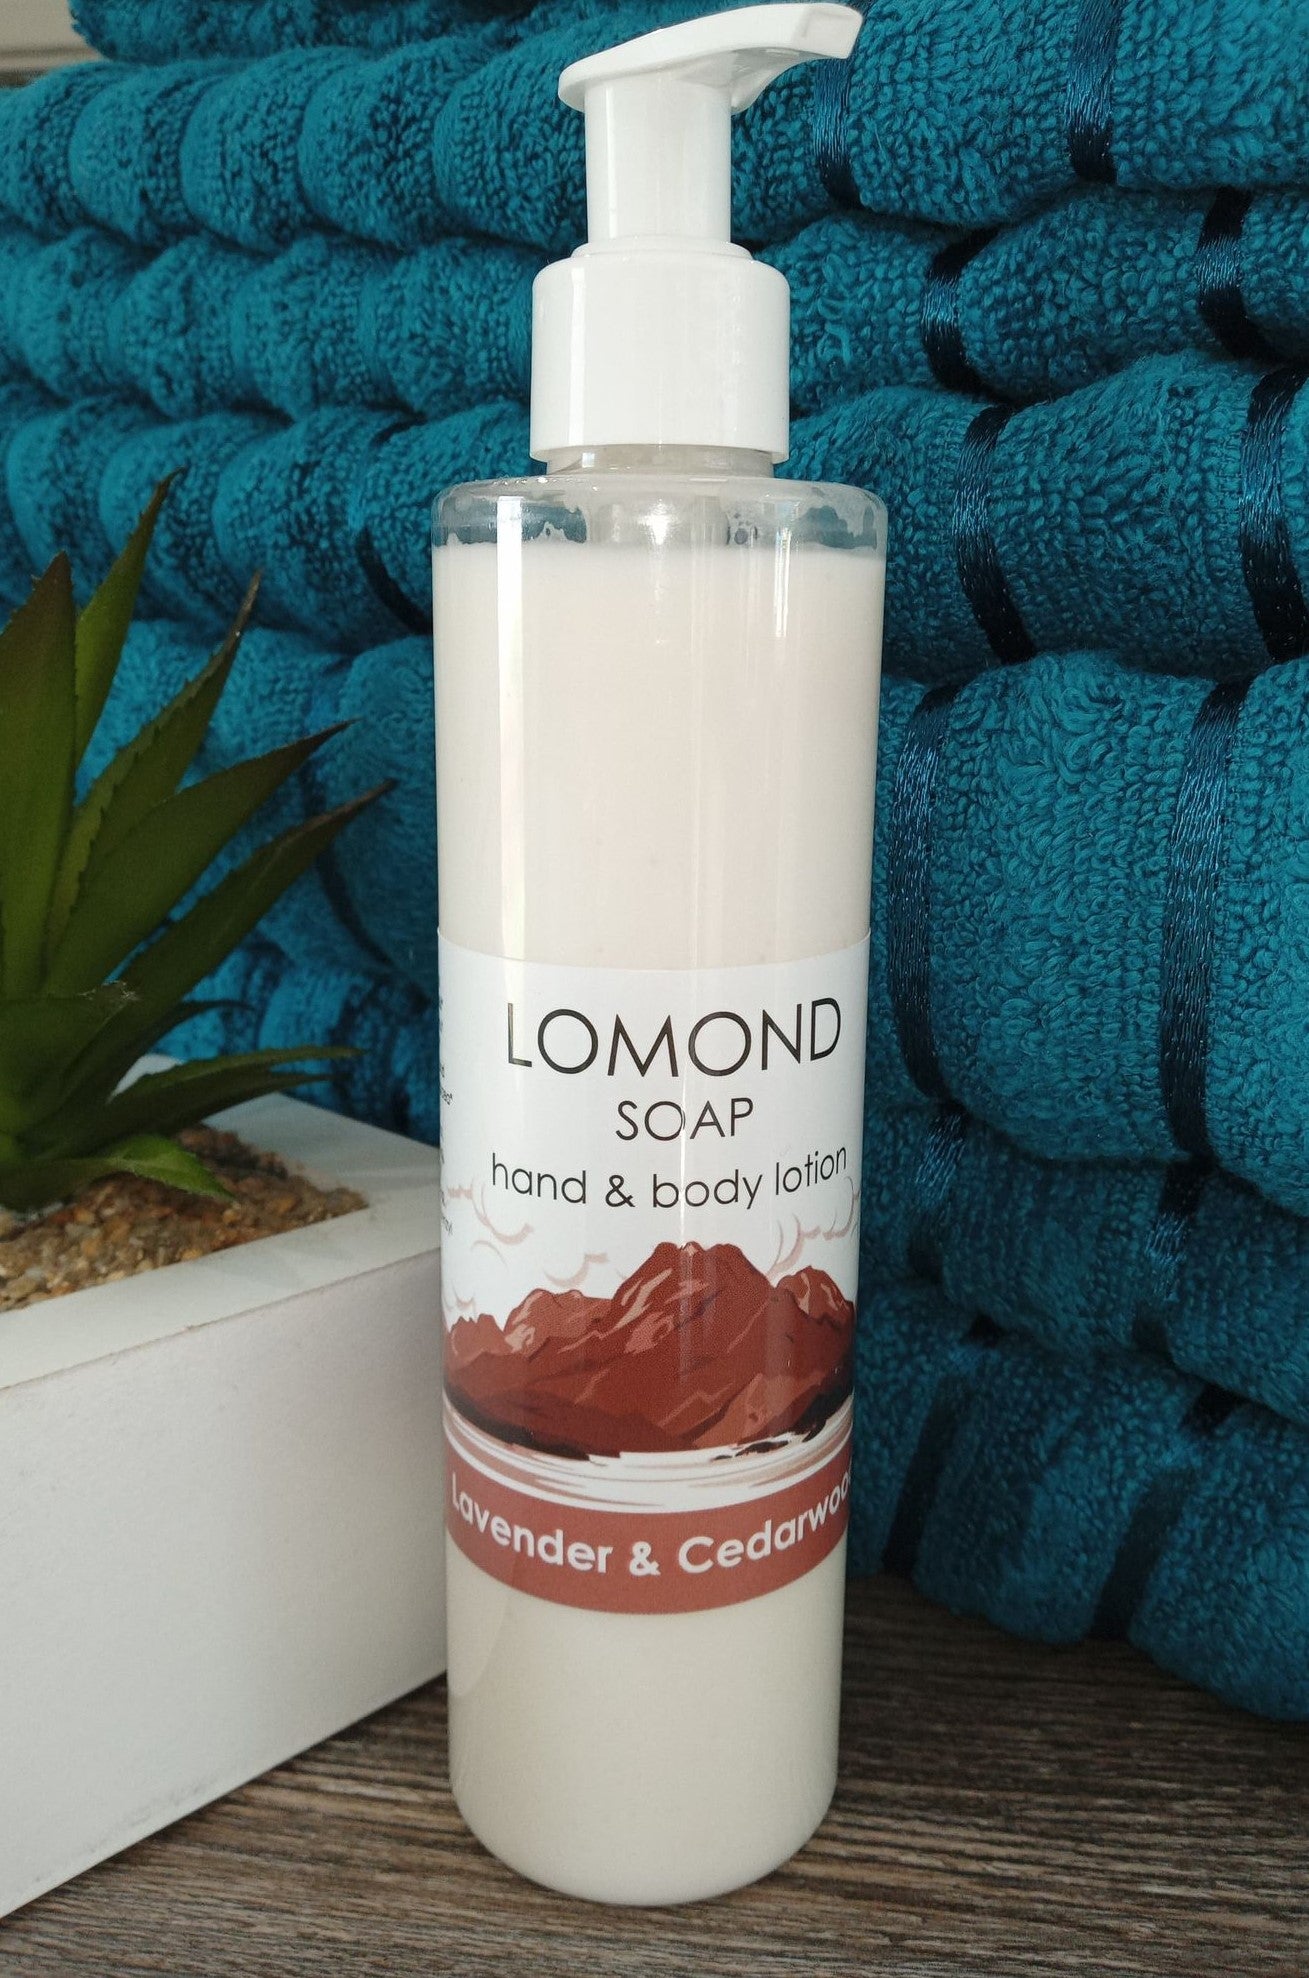 Lavender & cedarwood hand and body lotion